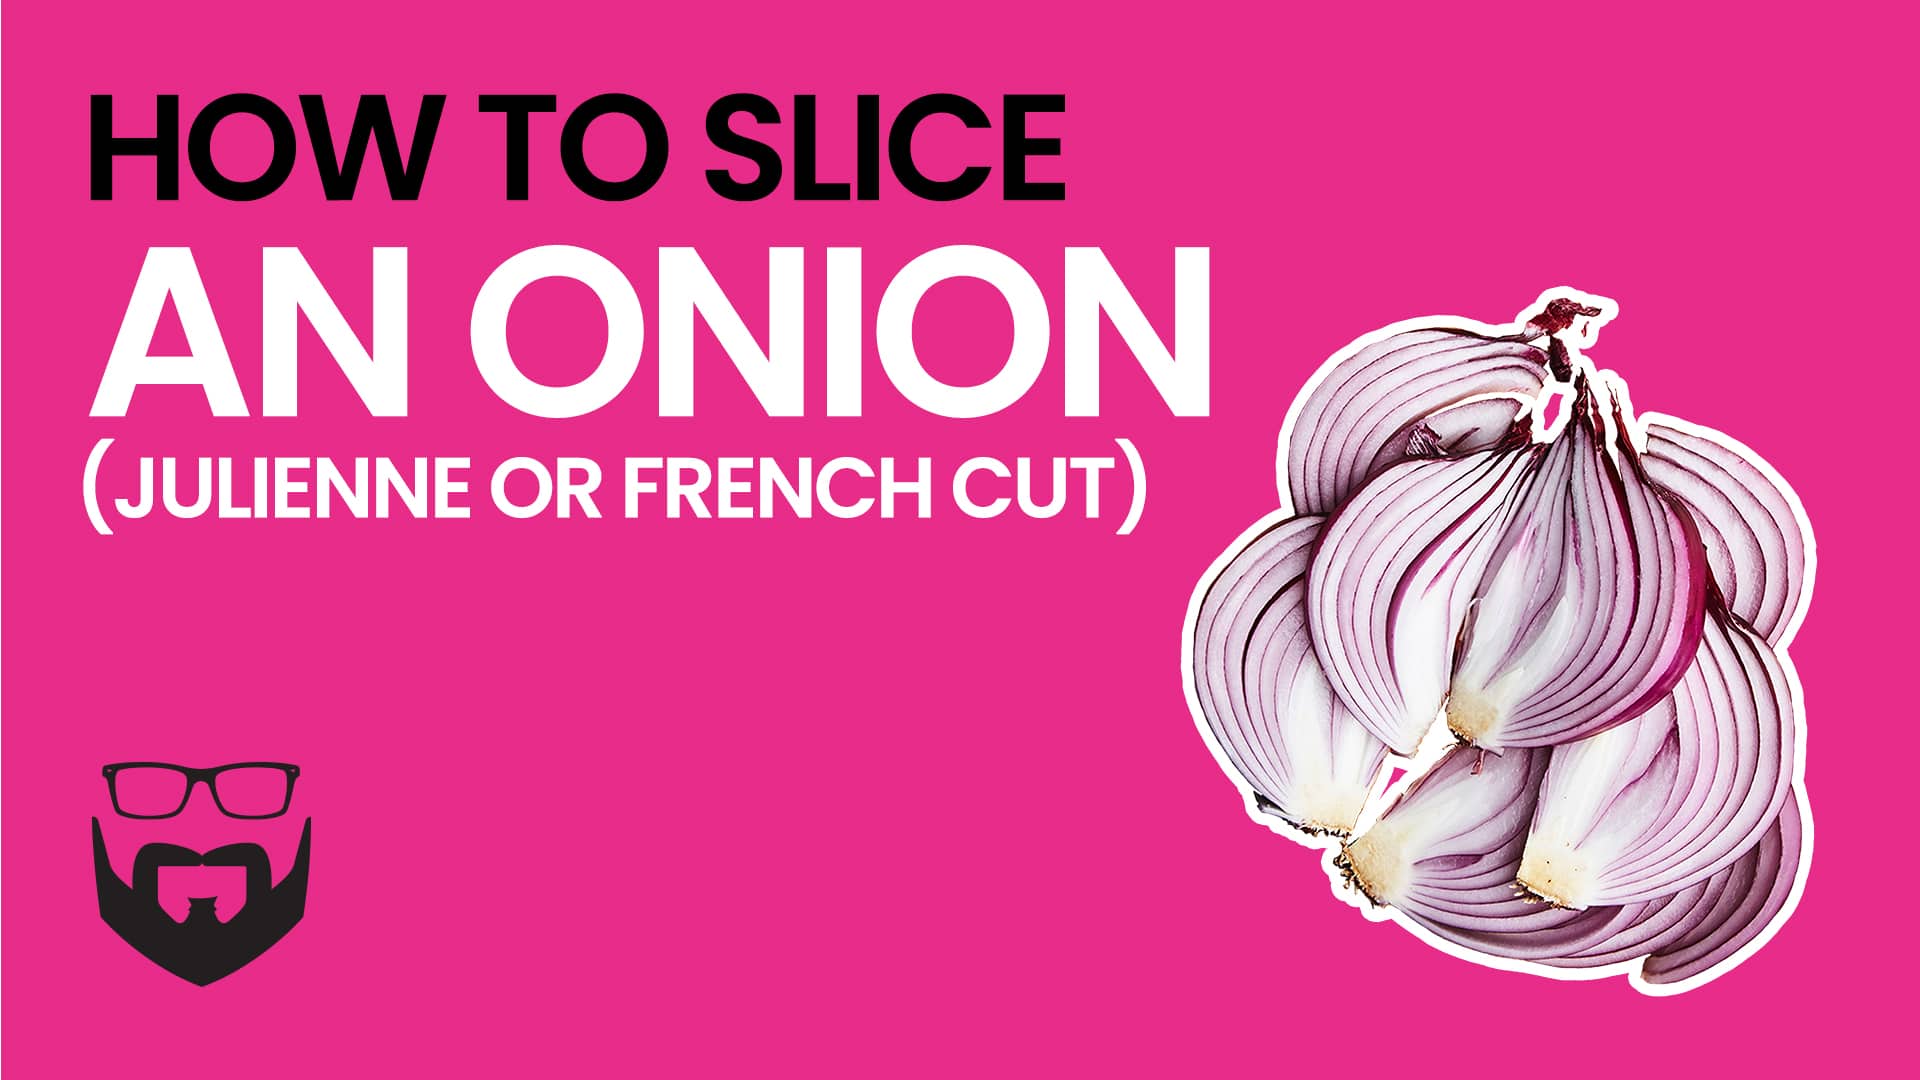 https://jerryjamesstone.com/wp-content/uploads/2023/01/How-to-Slice-an-Onion-Julinne-or-French-Cut-Video-Pink.jpg